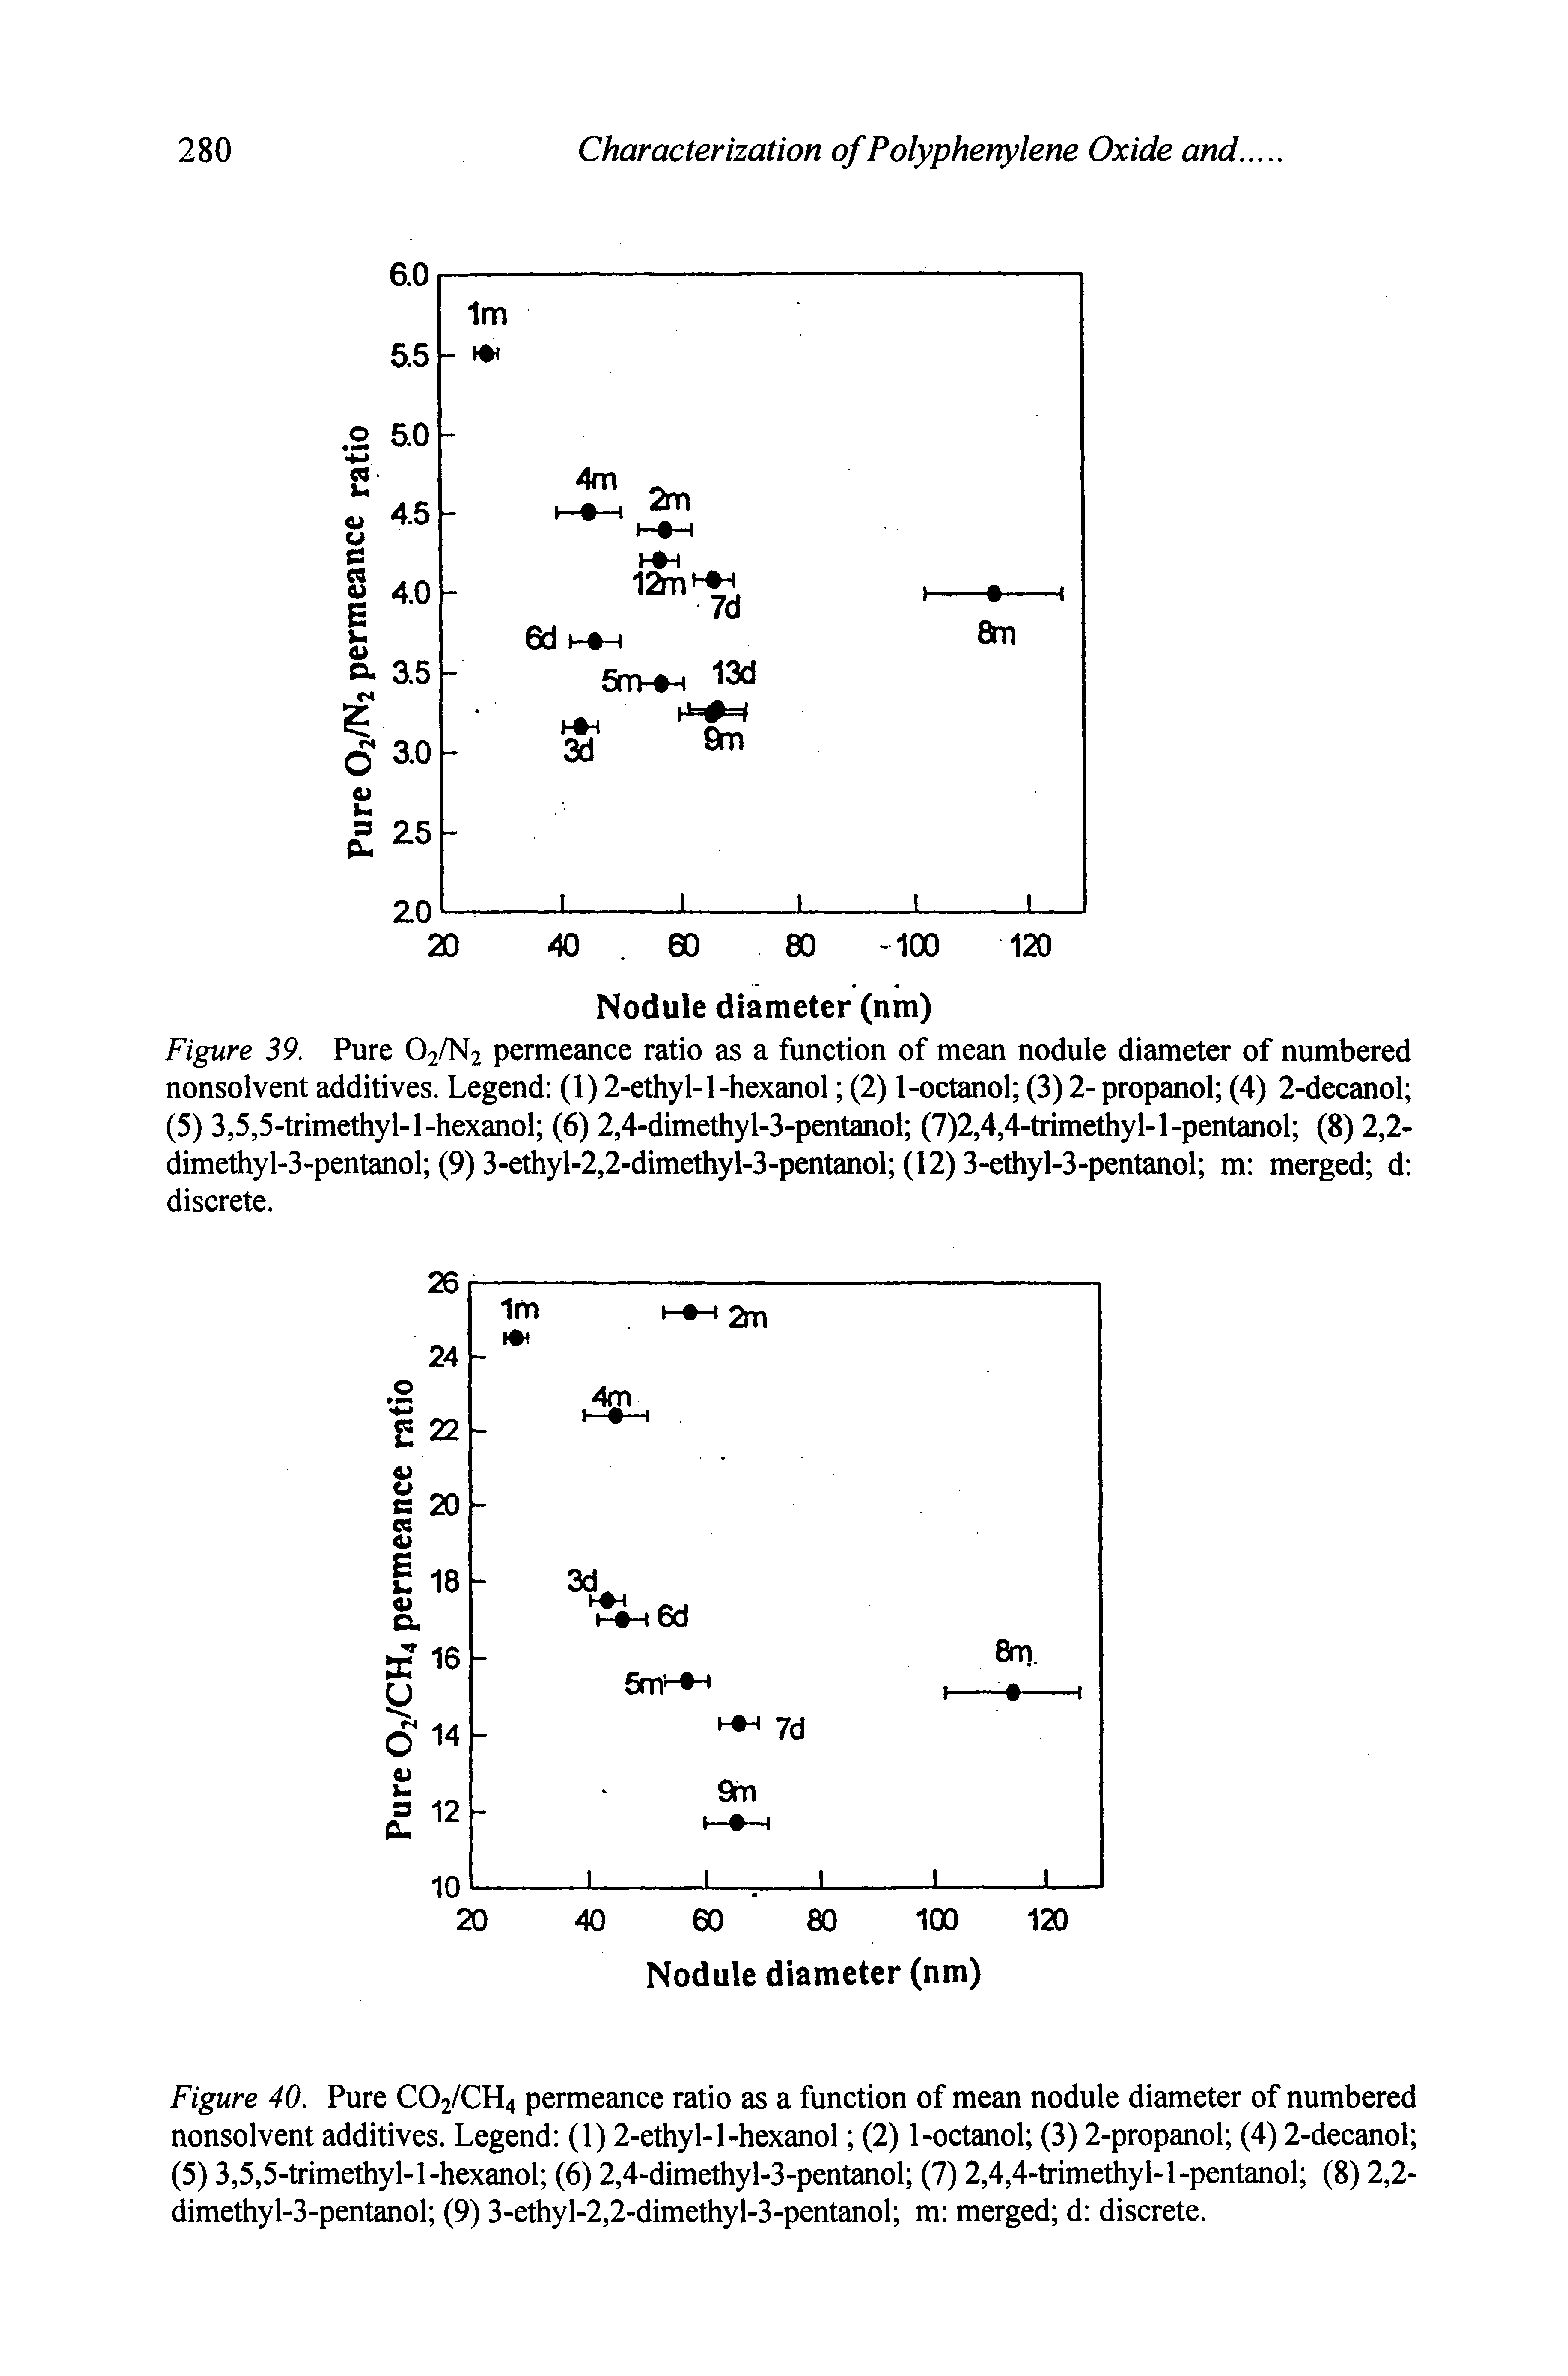 Figure 39. Pure O2/N2 permeance ratio as a function of mean nodule diameter of numbered nonsolvent additives. Legend (1) 2-ethyl-1-hexanol (2) 1-octanol (3) 2- propanol (4) 2-decanol (5) 3,5,5-trimethyl-1-hexanol (6) 2,4-dimethyl-3-pentanol (7)2,4,4-trimethyl-l-pentanol (8) 2,2-dimethyl-3-pentanol (9) 3-ethyl-2,2-dimethyl-3-pentanol (12) 3-ethyl-3-pentanol m merged d discrete.